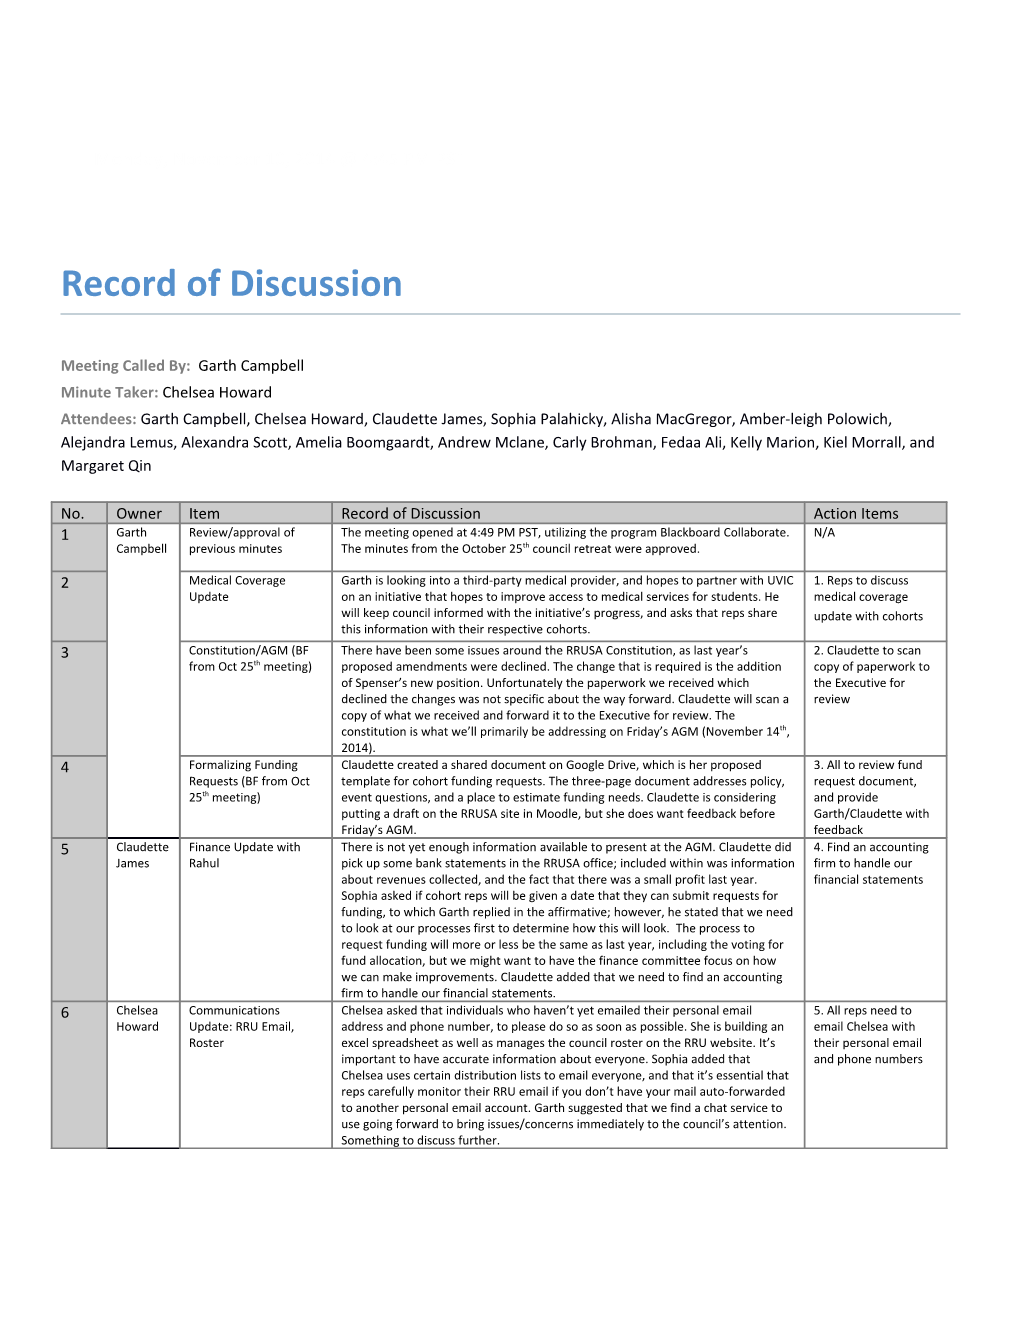 Record of Discussion s1